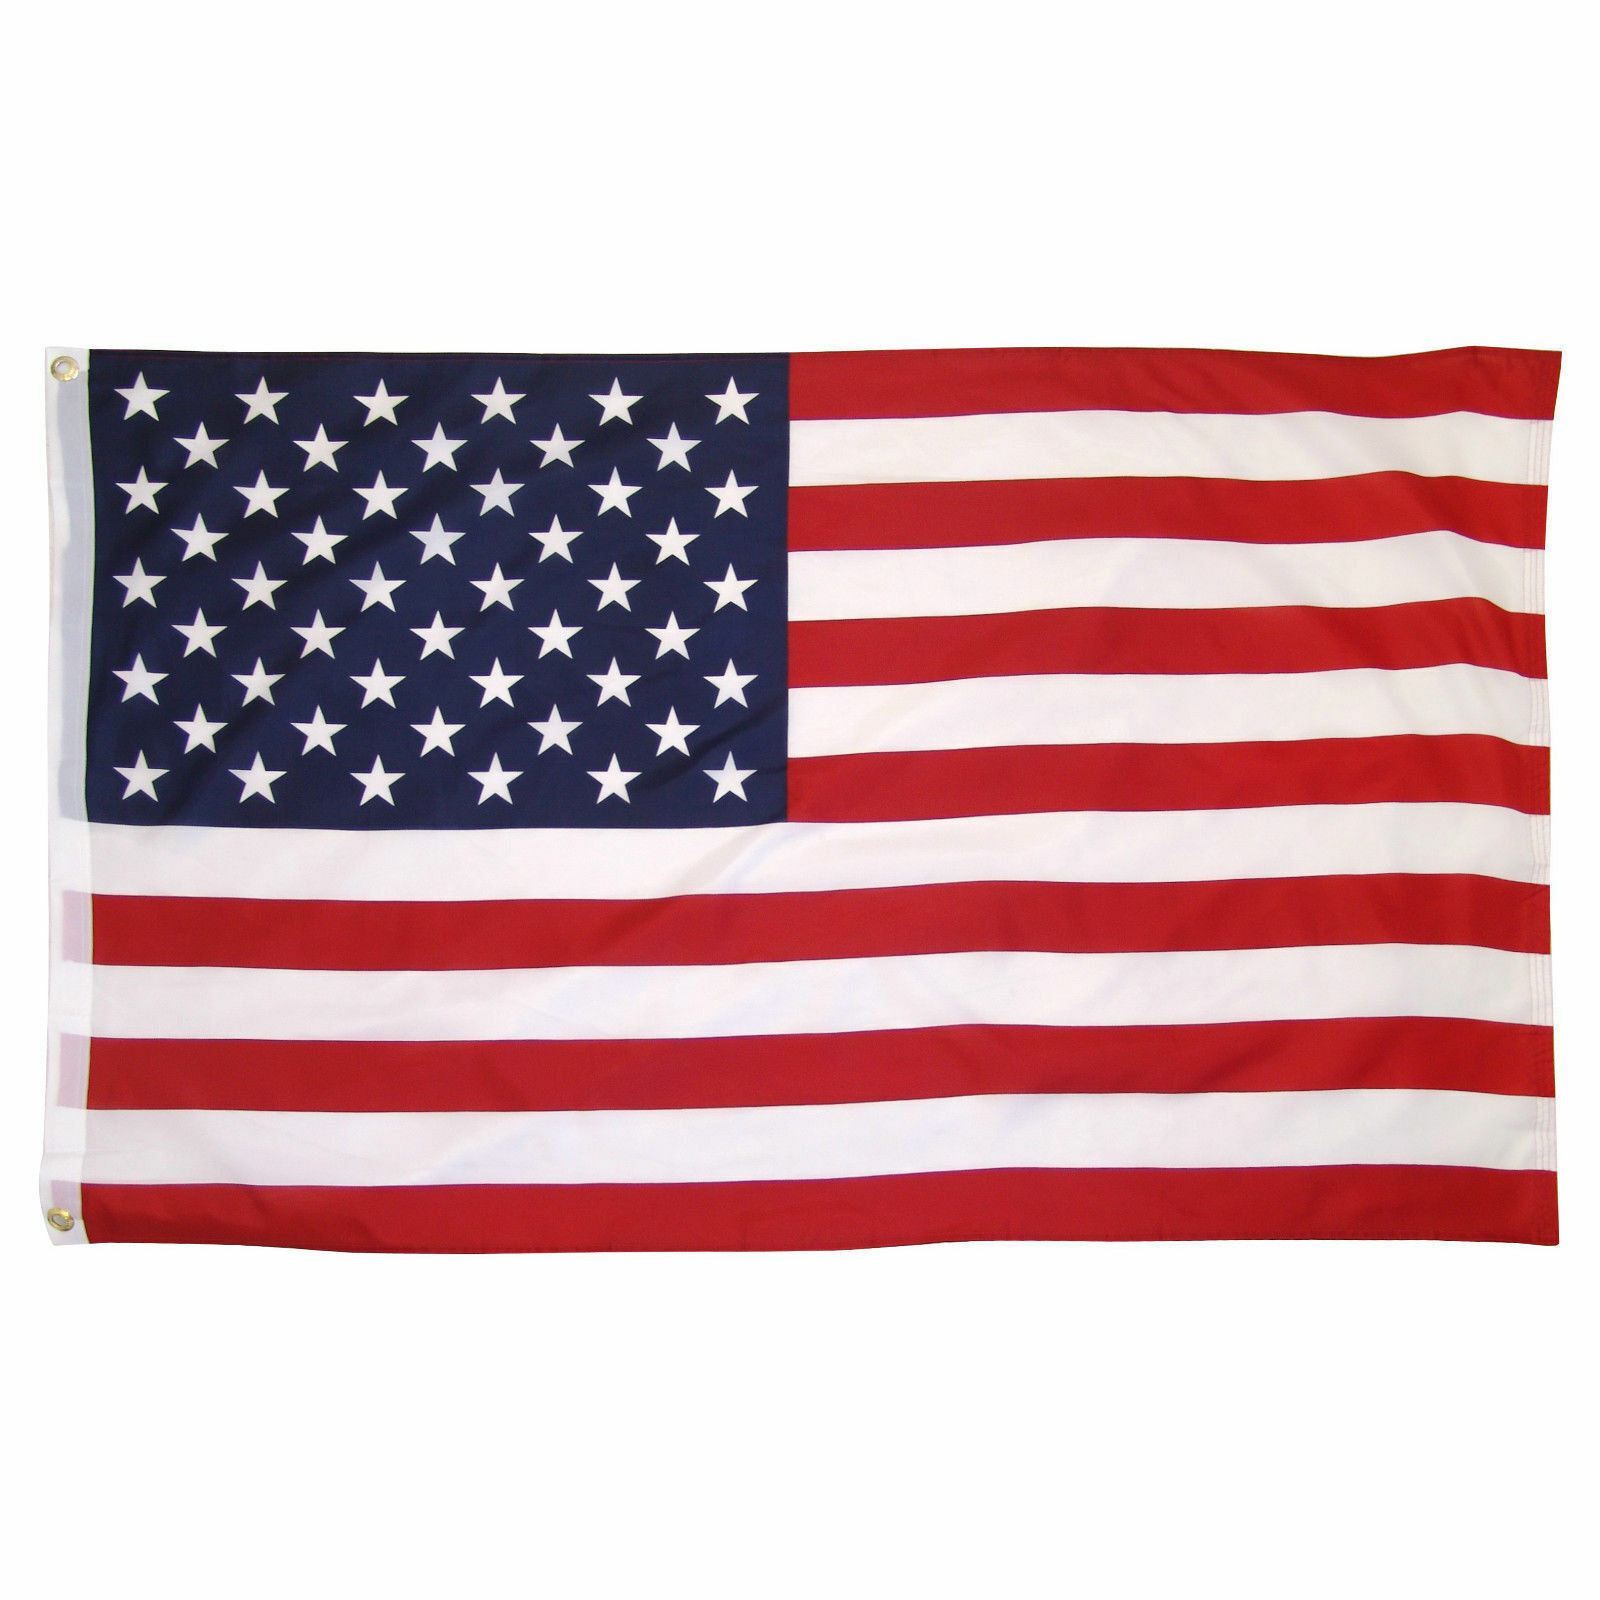 3'x5' United States Marines, Army, Air Force, Navy, Coast Guard US Military Flag